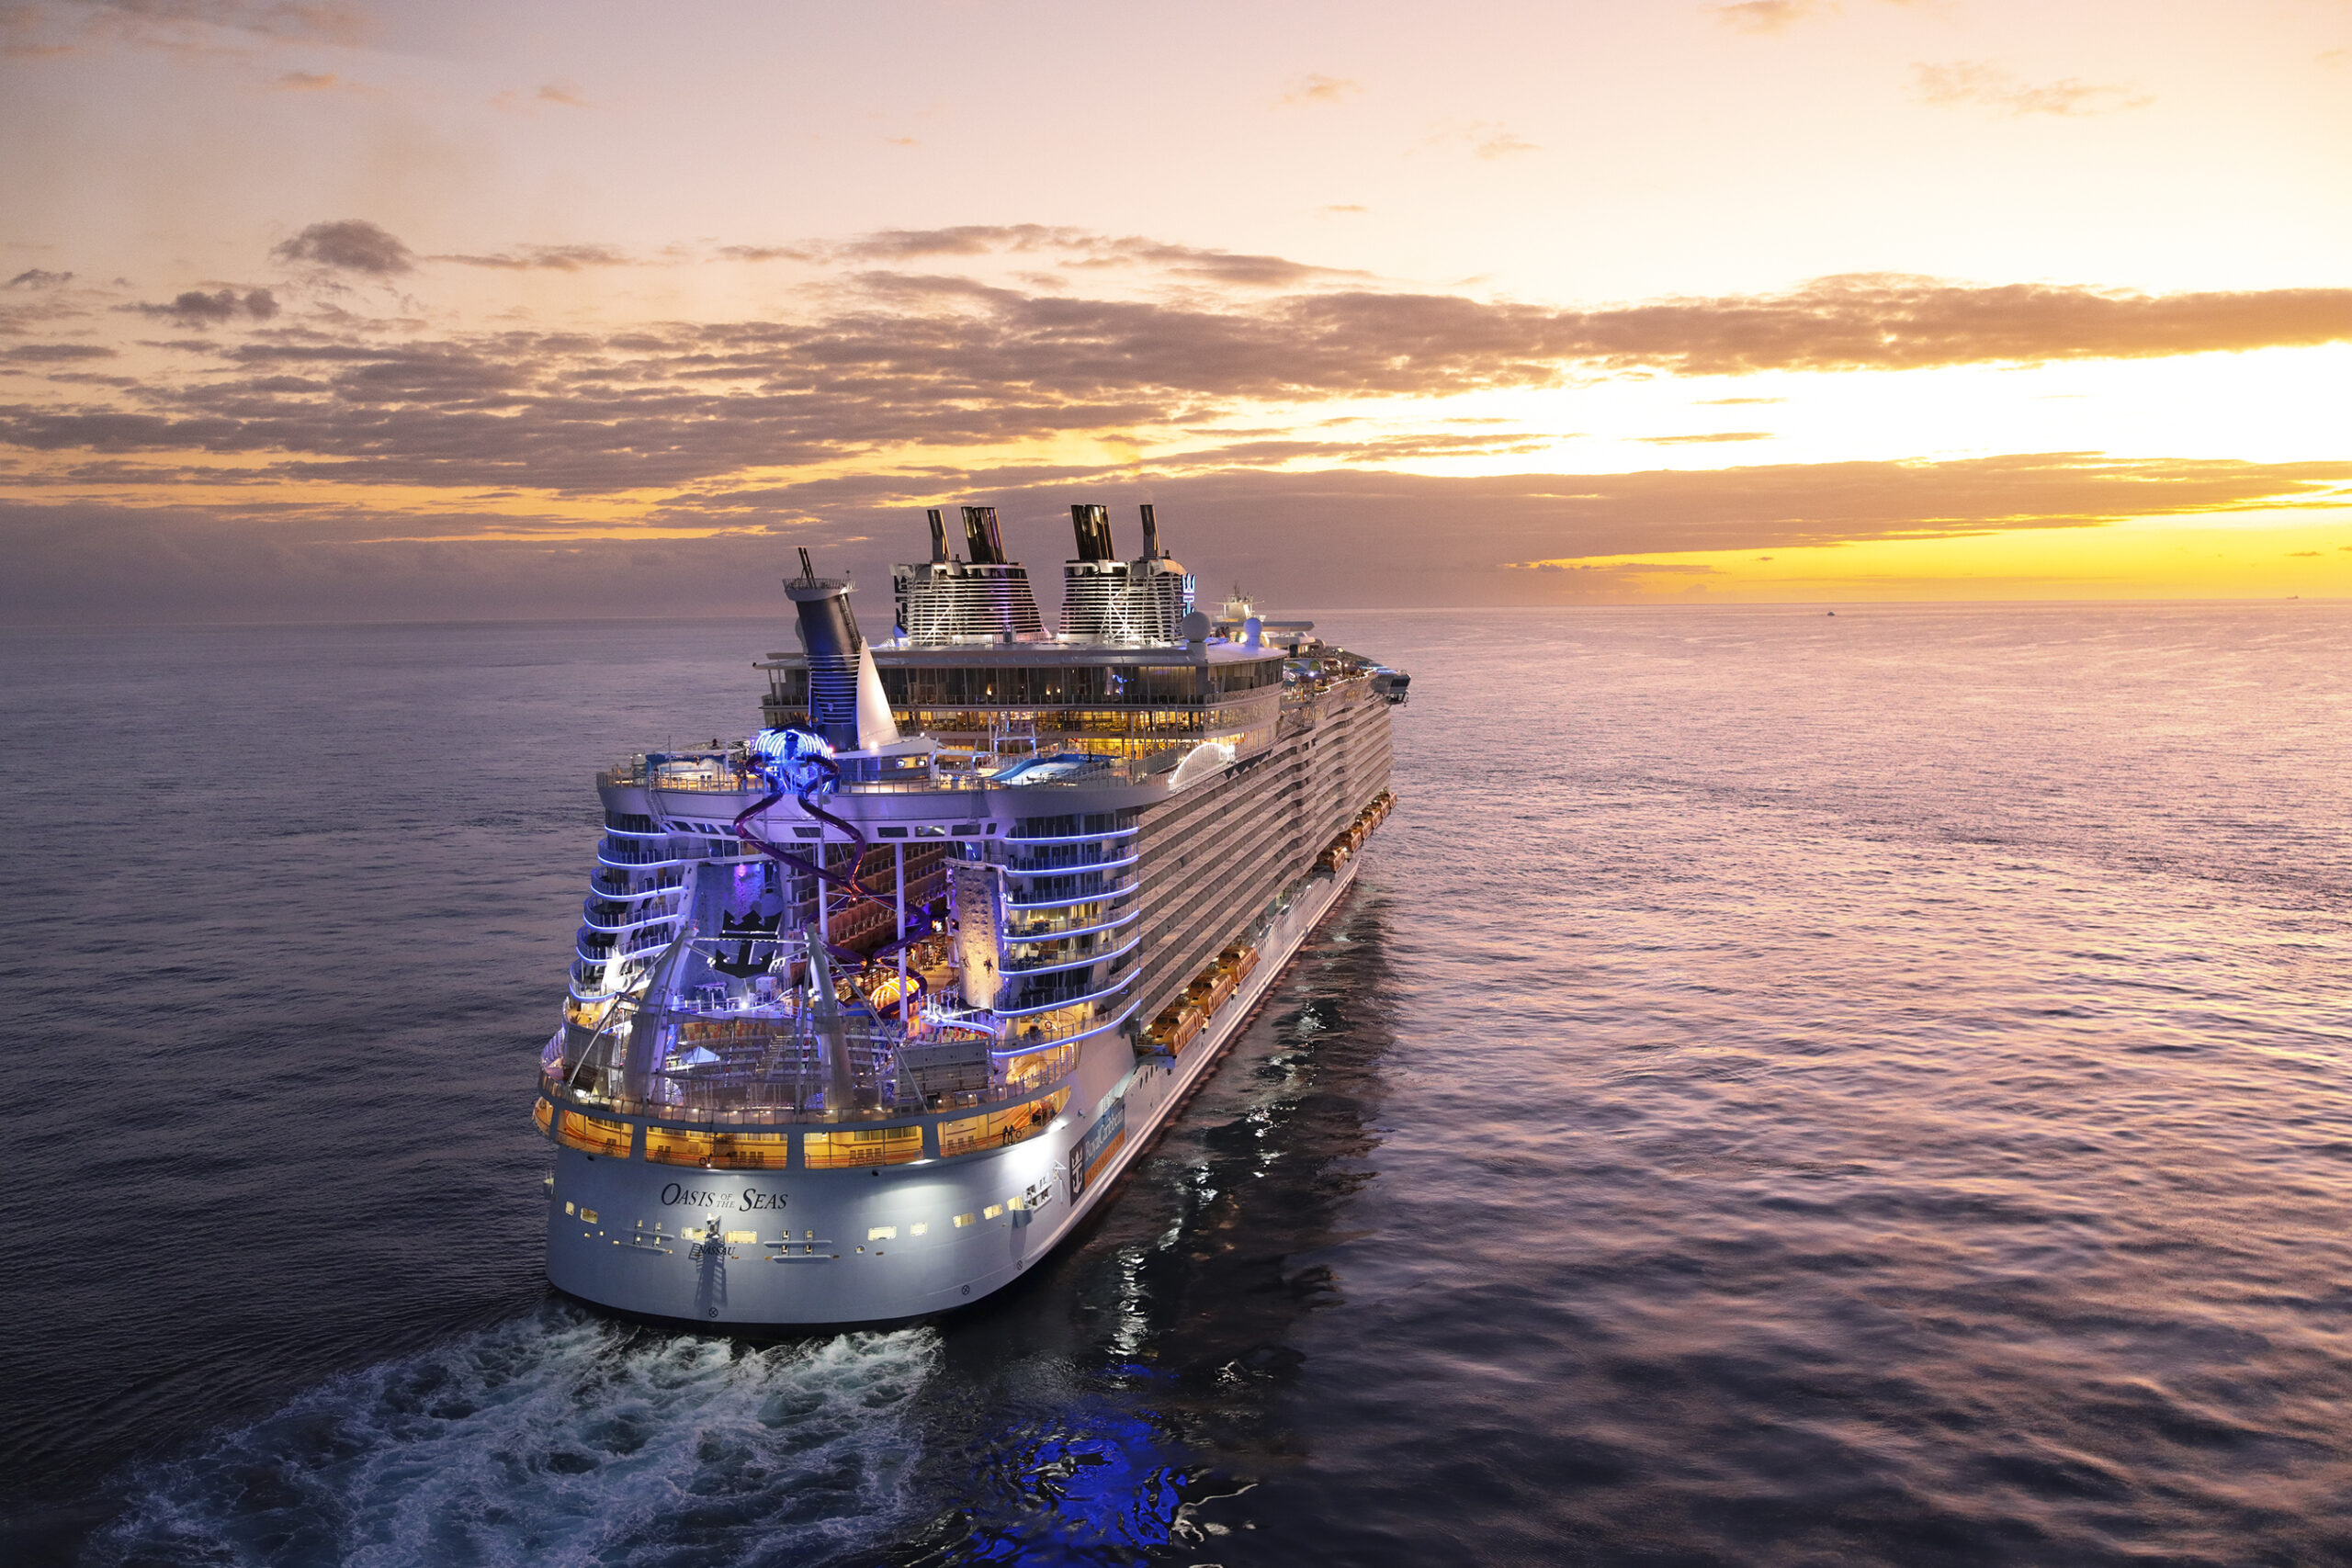 Entire Royal Caribbean Fleet To Be Sailing By Spring 2022 | Travel Pursuit